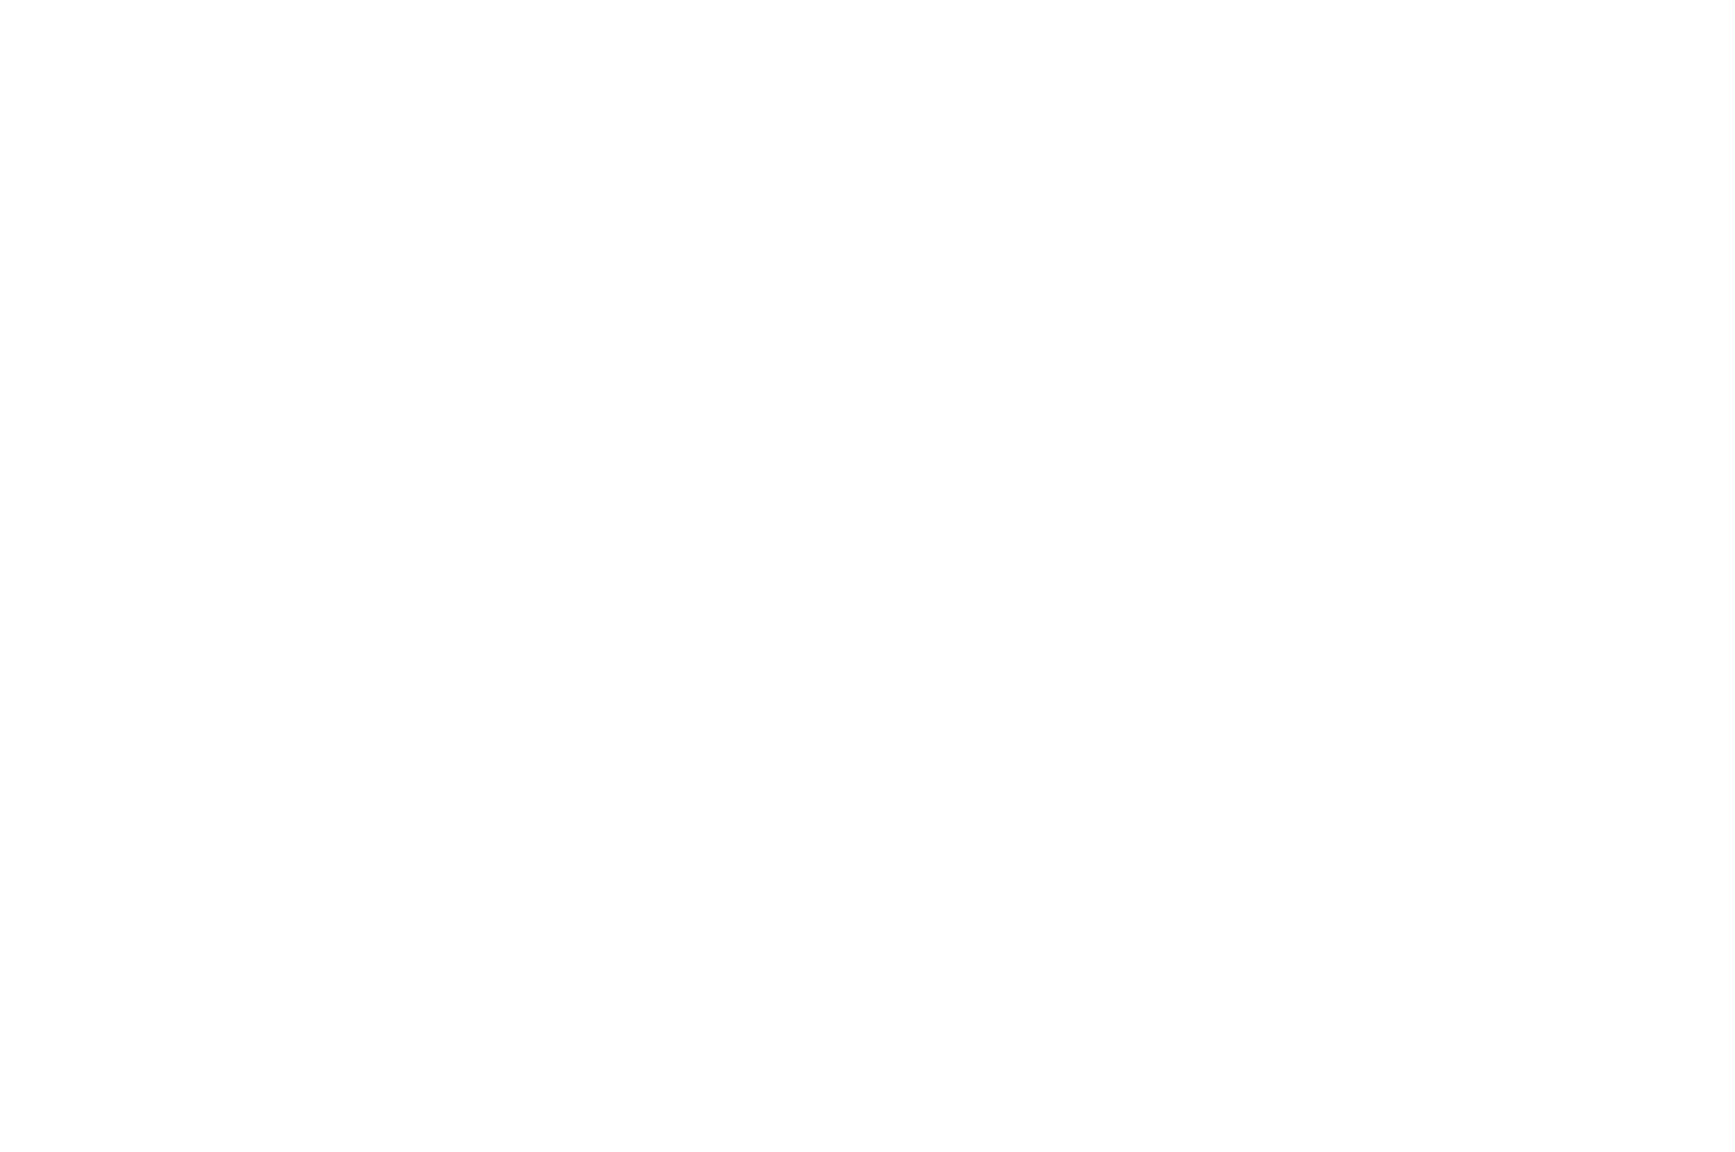 OFFICIAL SELECTION - CINECITY Brighton Film Festival - 2018.png